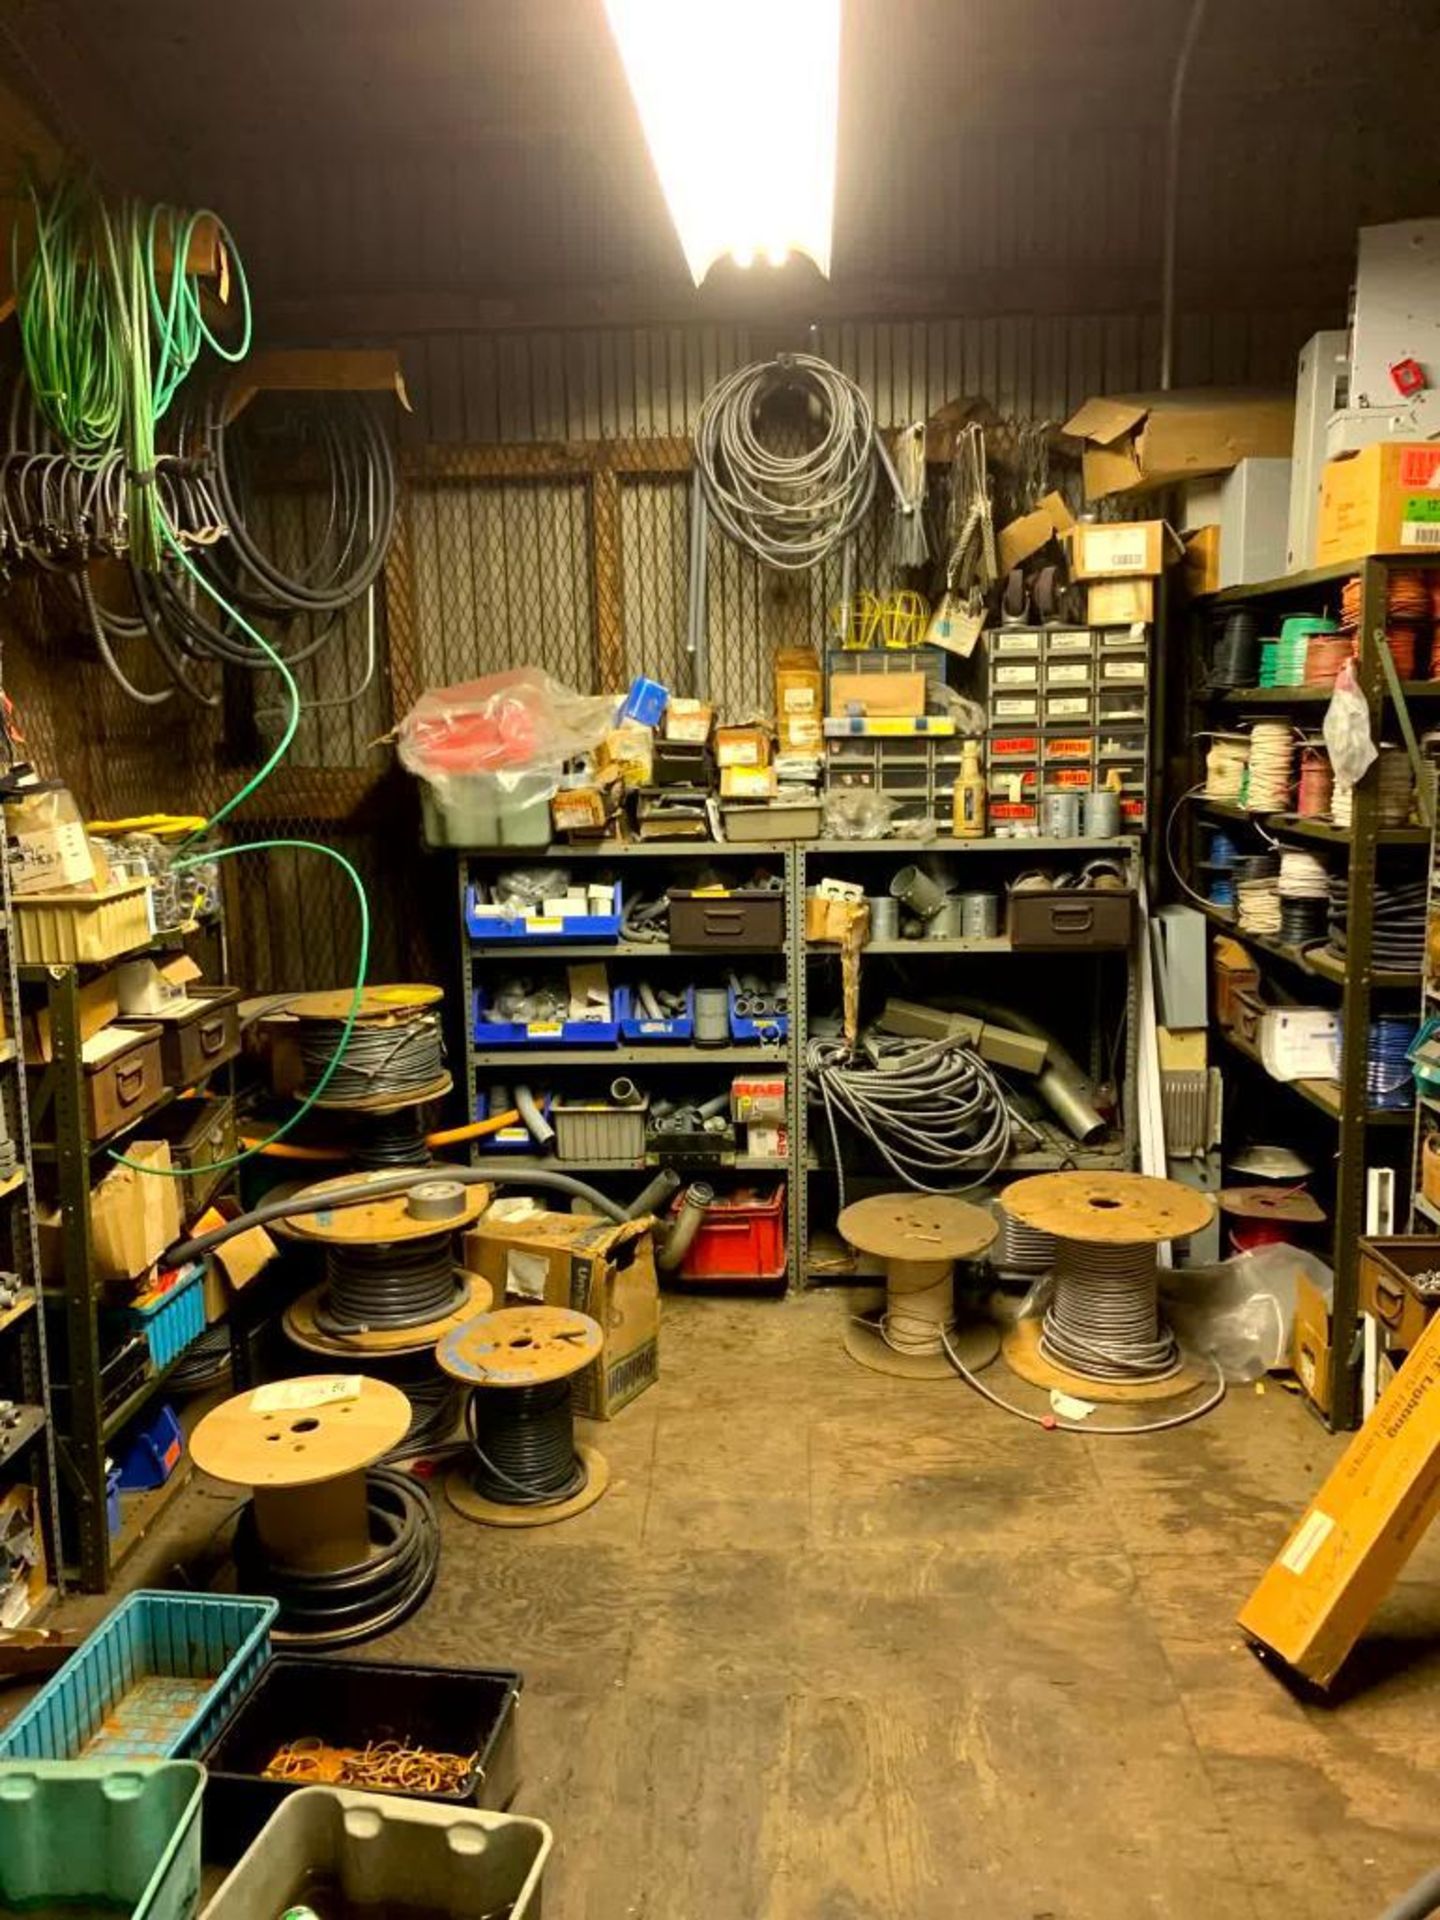 Content of Electrical Supply Room; Spools of Wire, Couplings, Breakers, Fuses, & Much More - Image 3 of 18